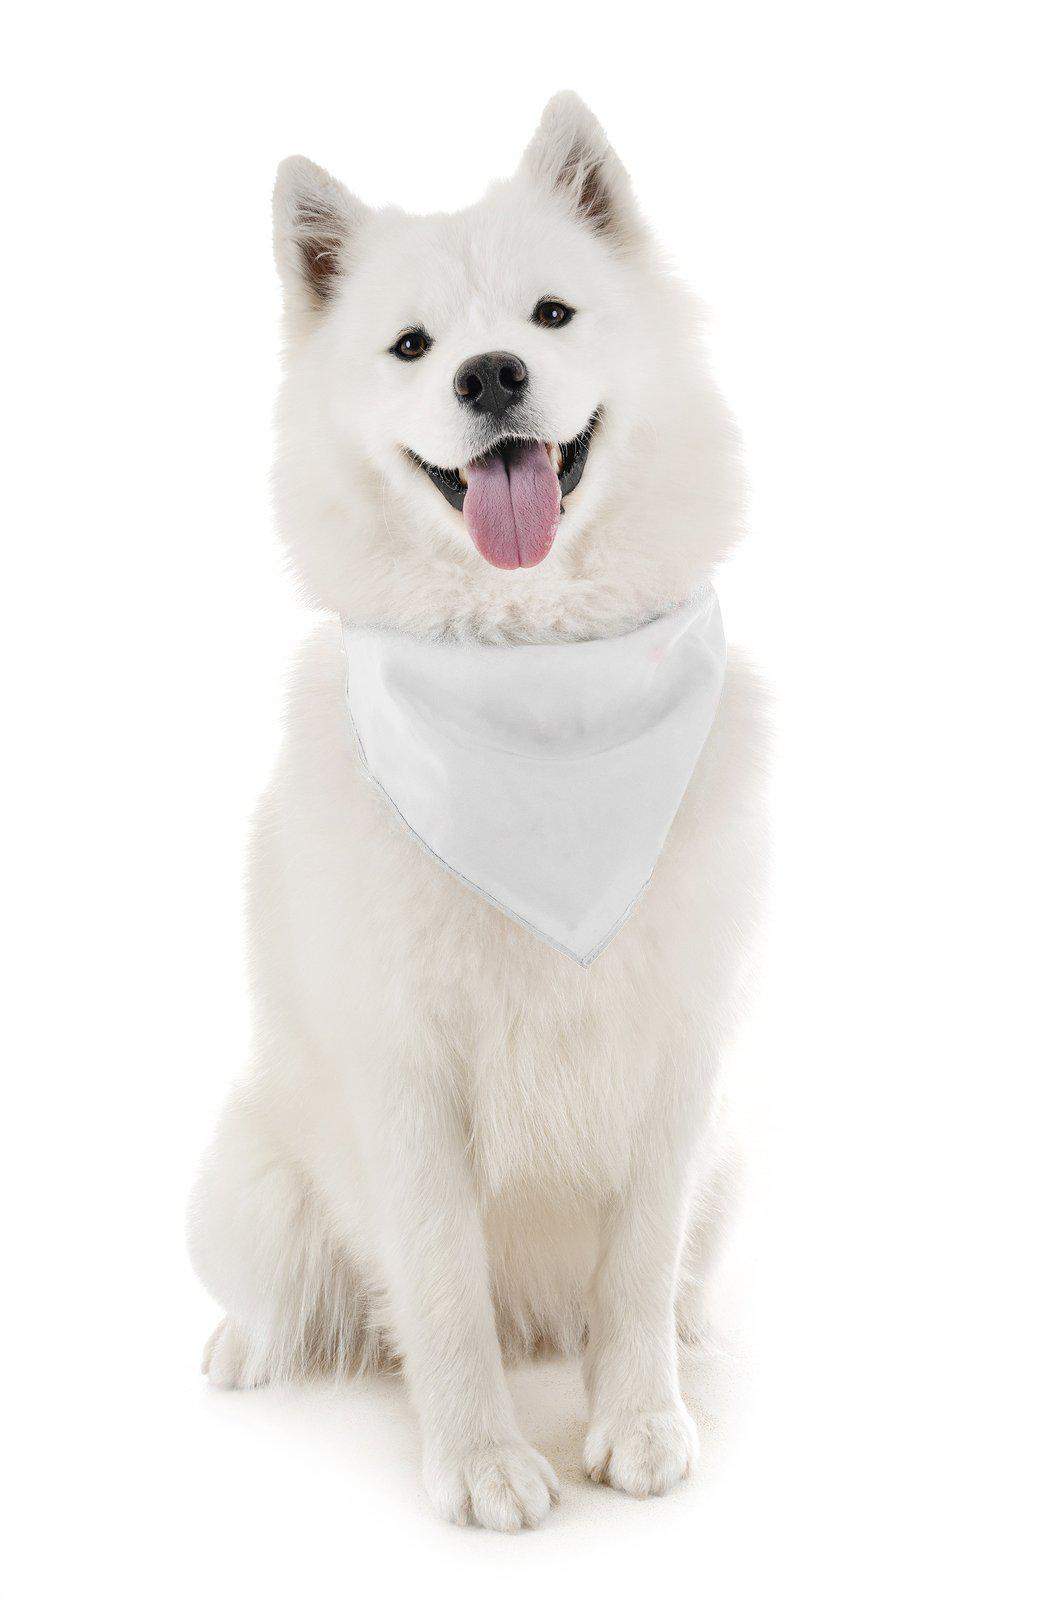 Balec Dog Solid Cotton Bandanas - 5 Pieces - Scarf Triangle Bibs for Any Small, Medium or Large Pets